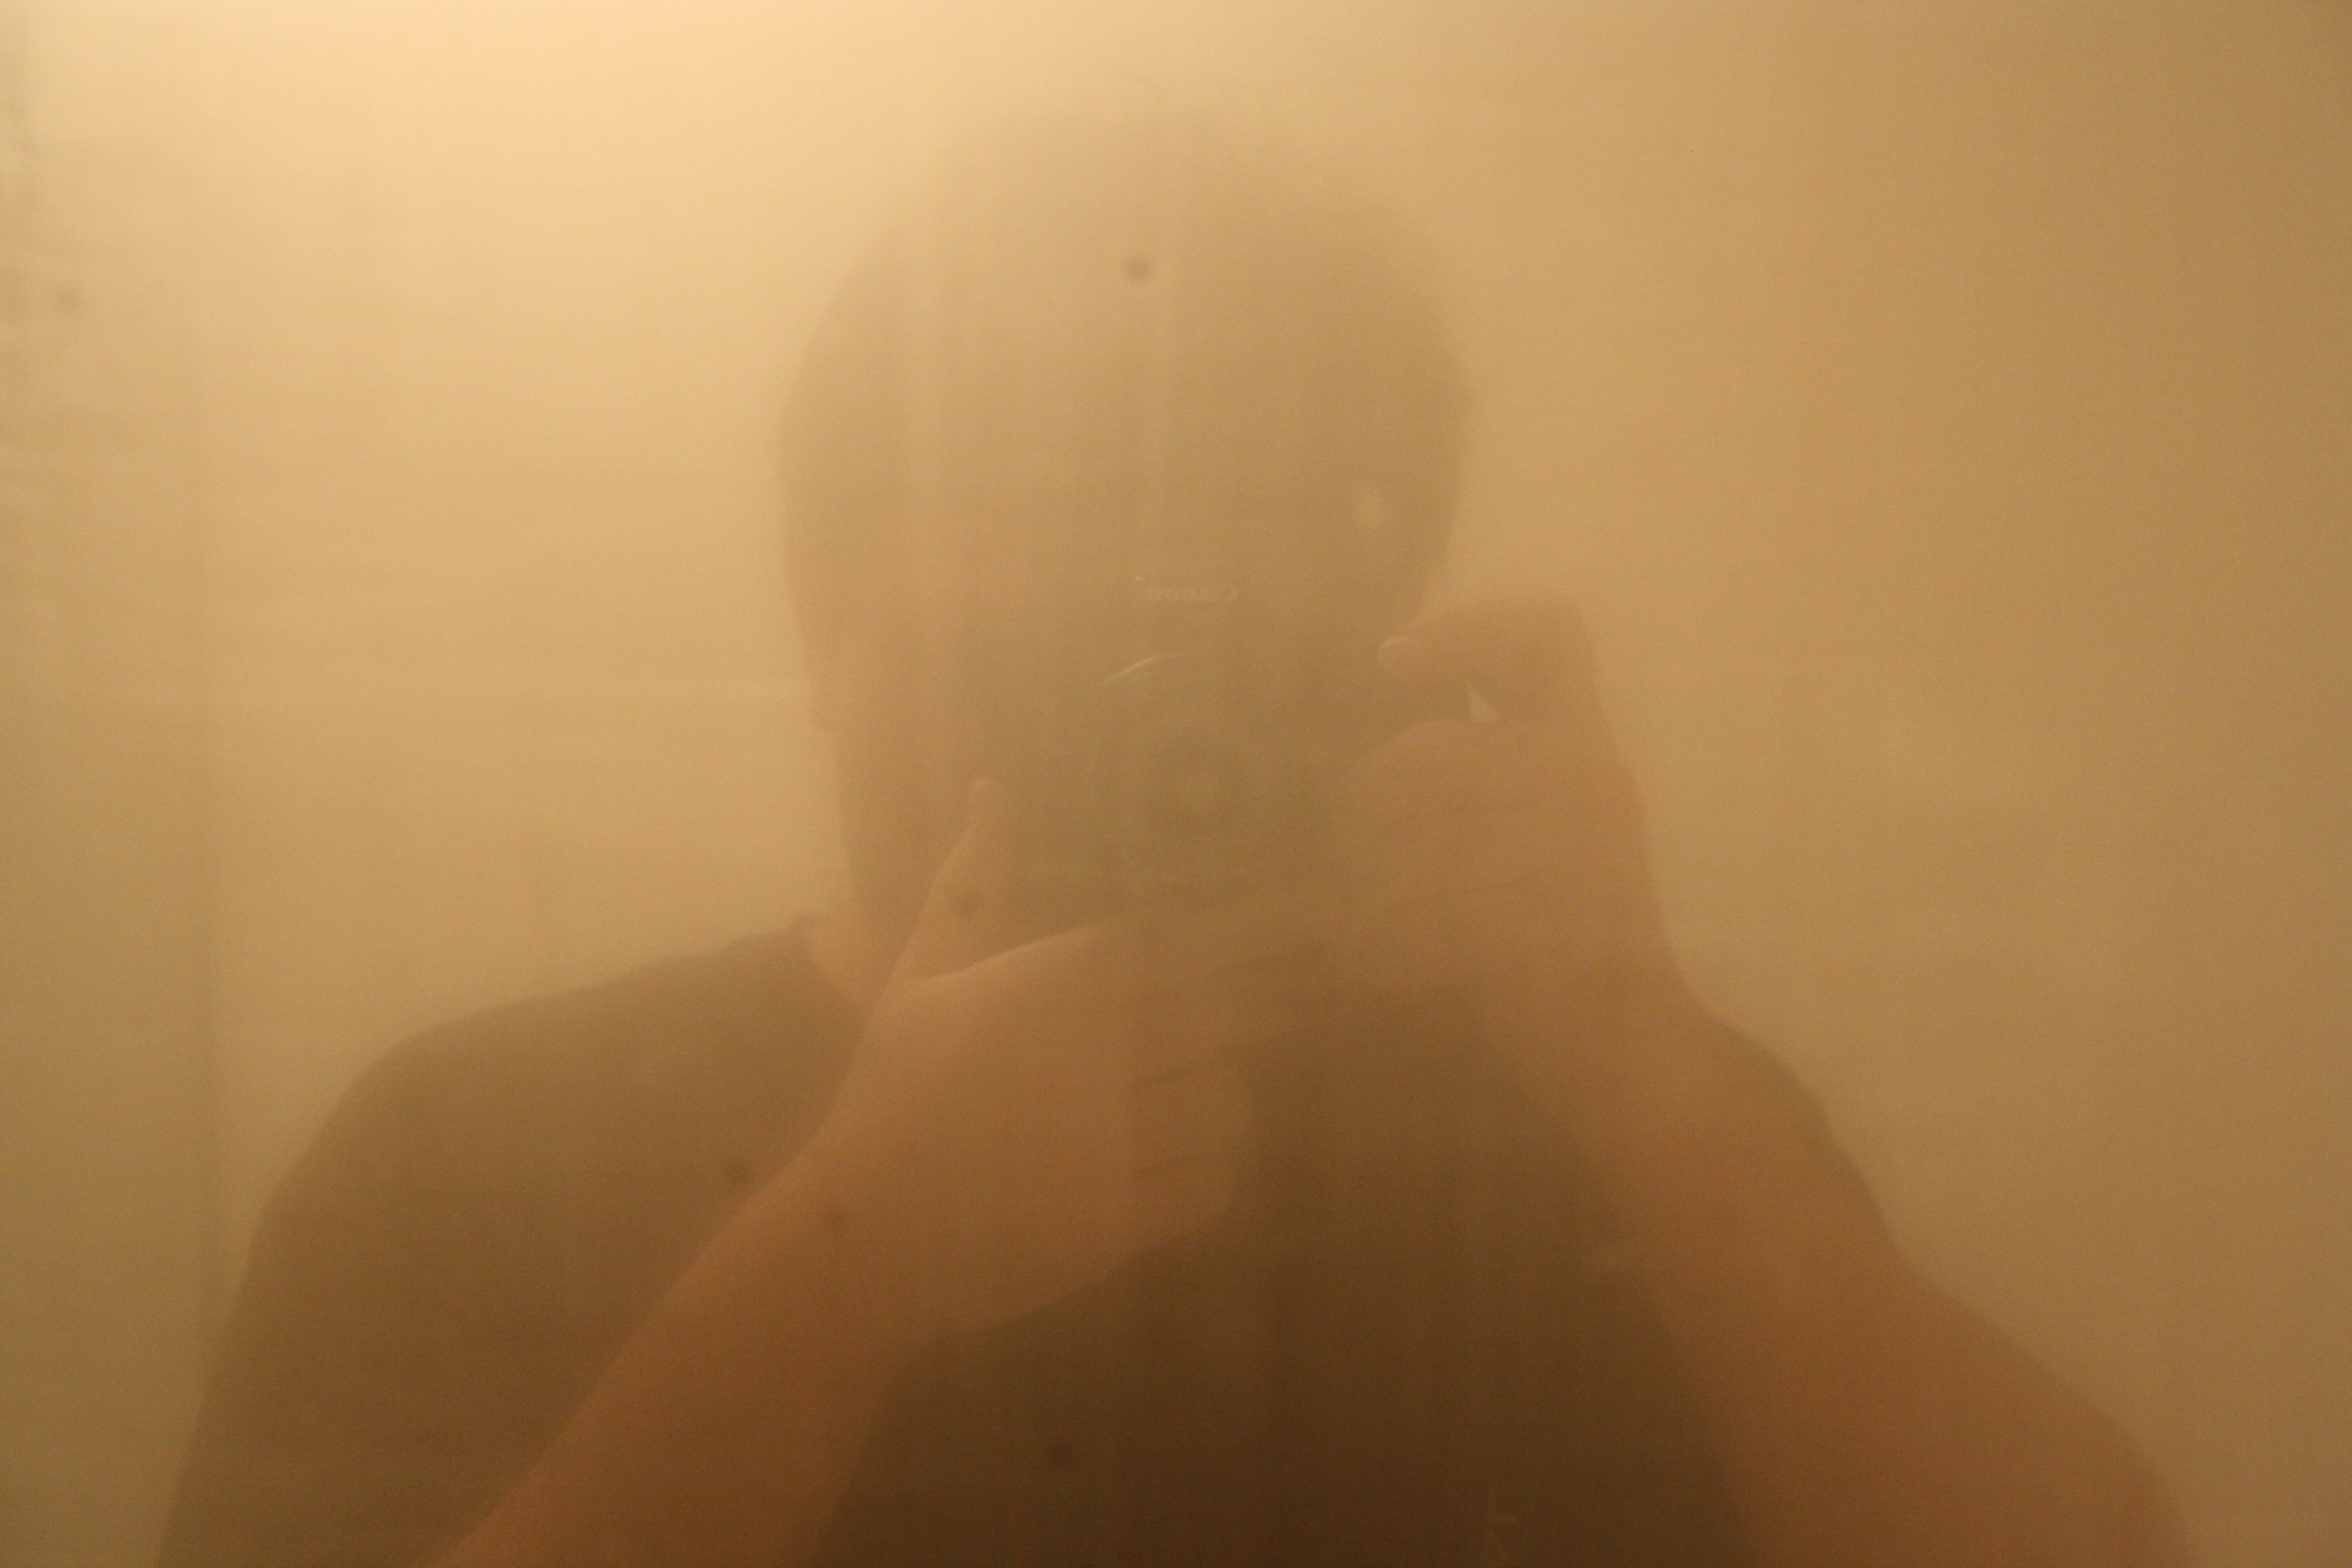 A person looking into a foggy mirror.